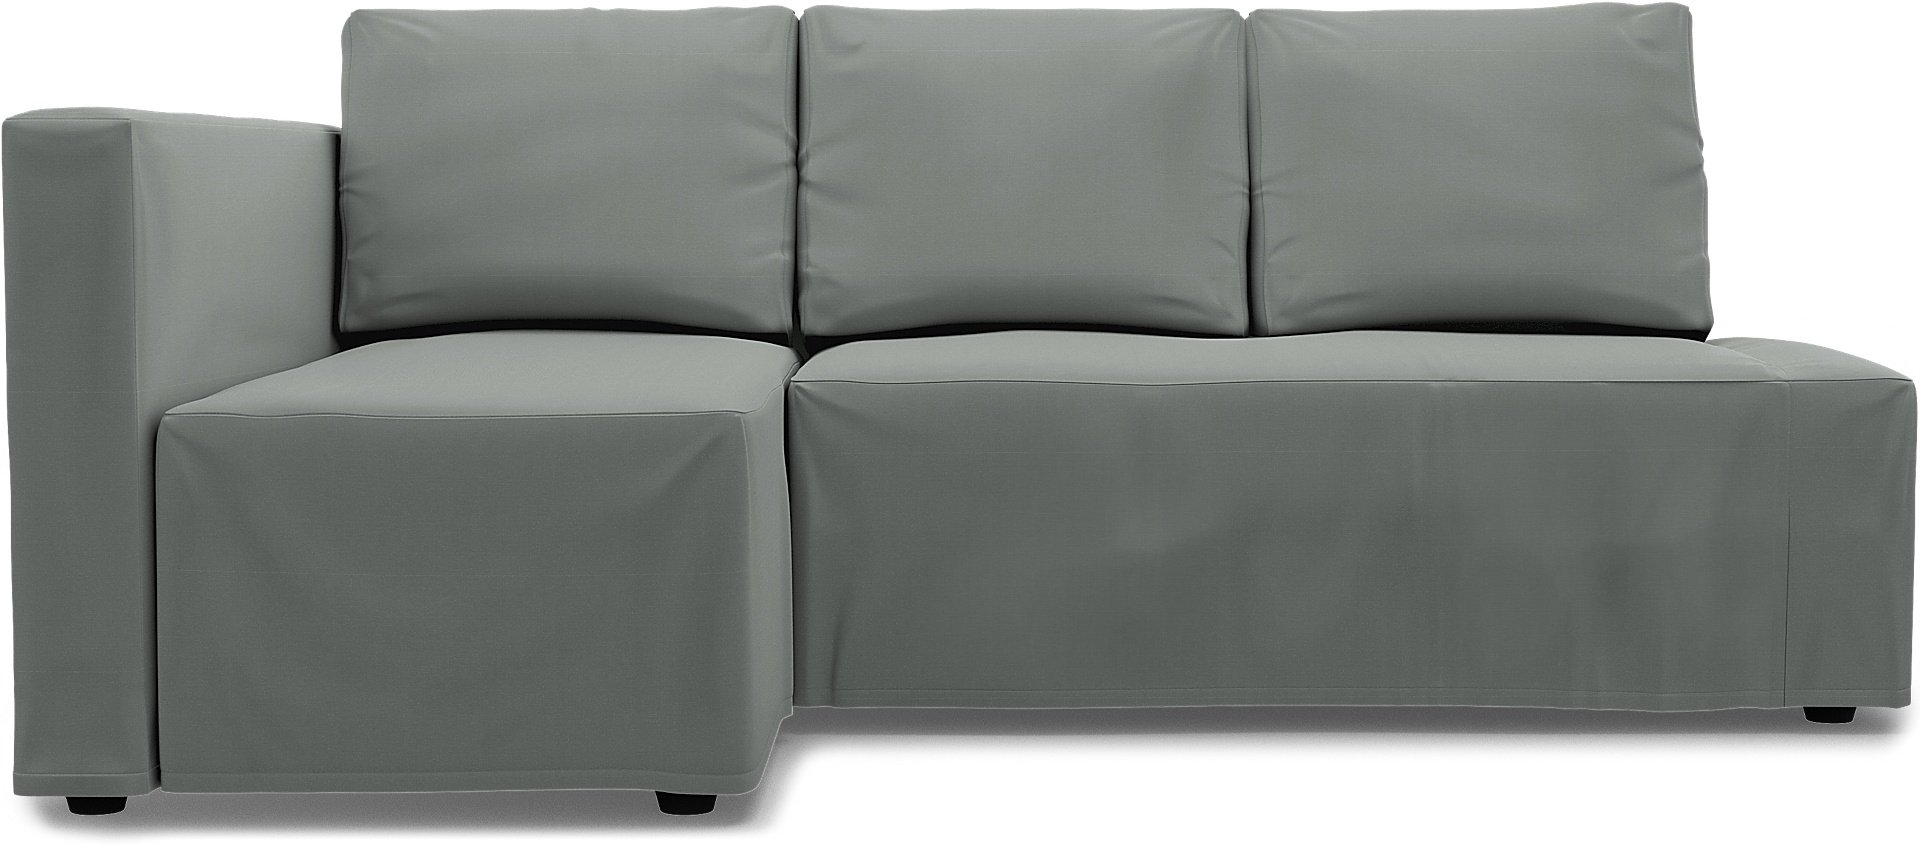 IKEA - Friheten Sofa Bed with Left Chaise Cover, Drizzle, Cotton - Bemz